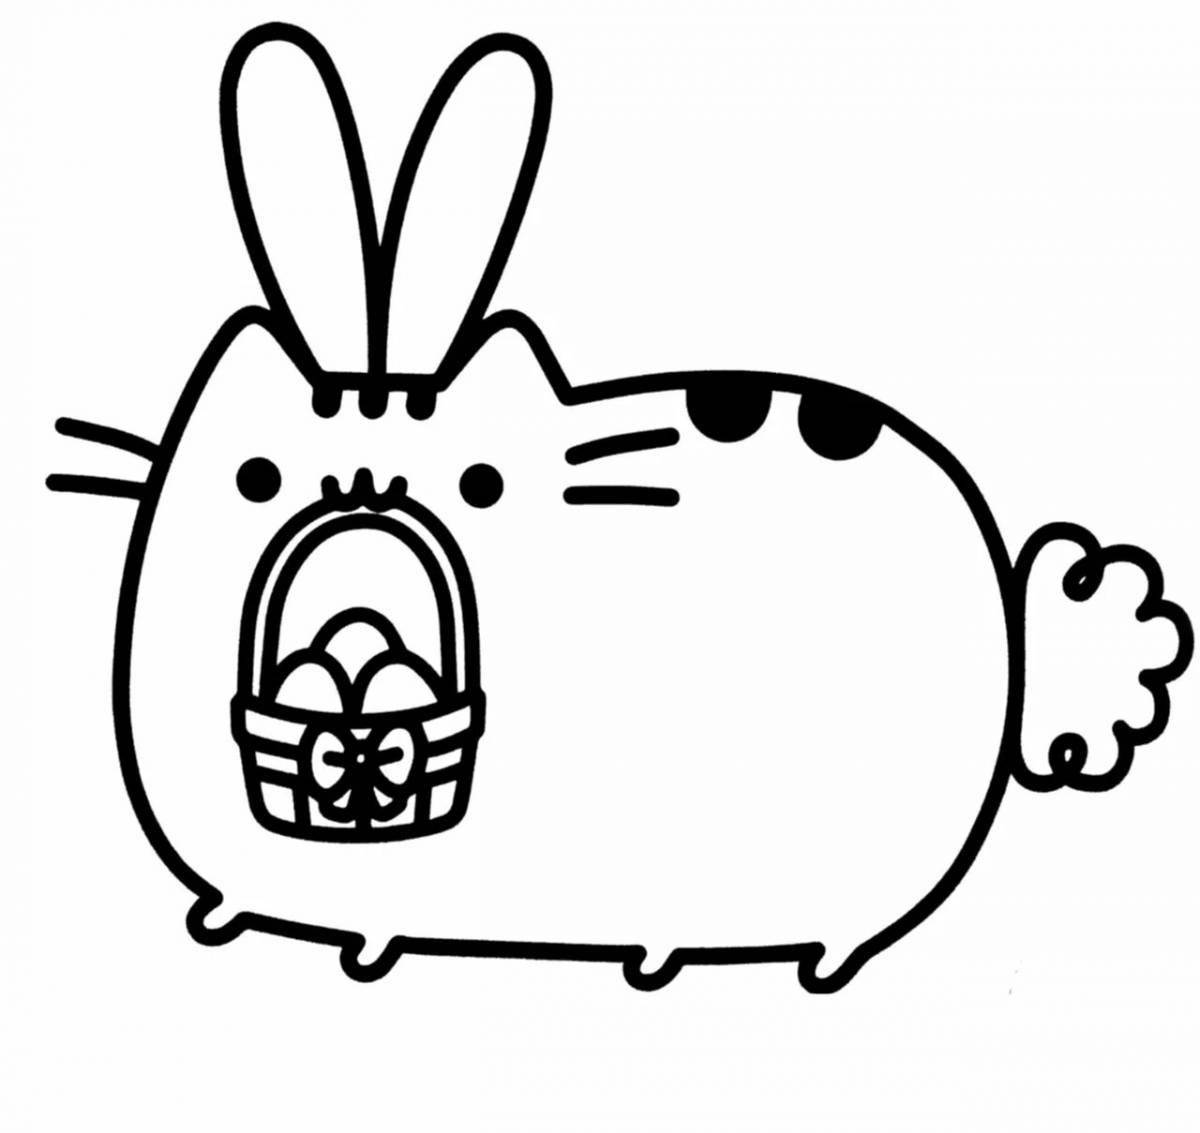 Adorable Pusheen Cats Coloring Pages